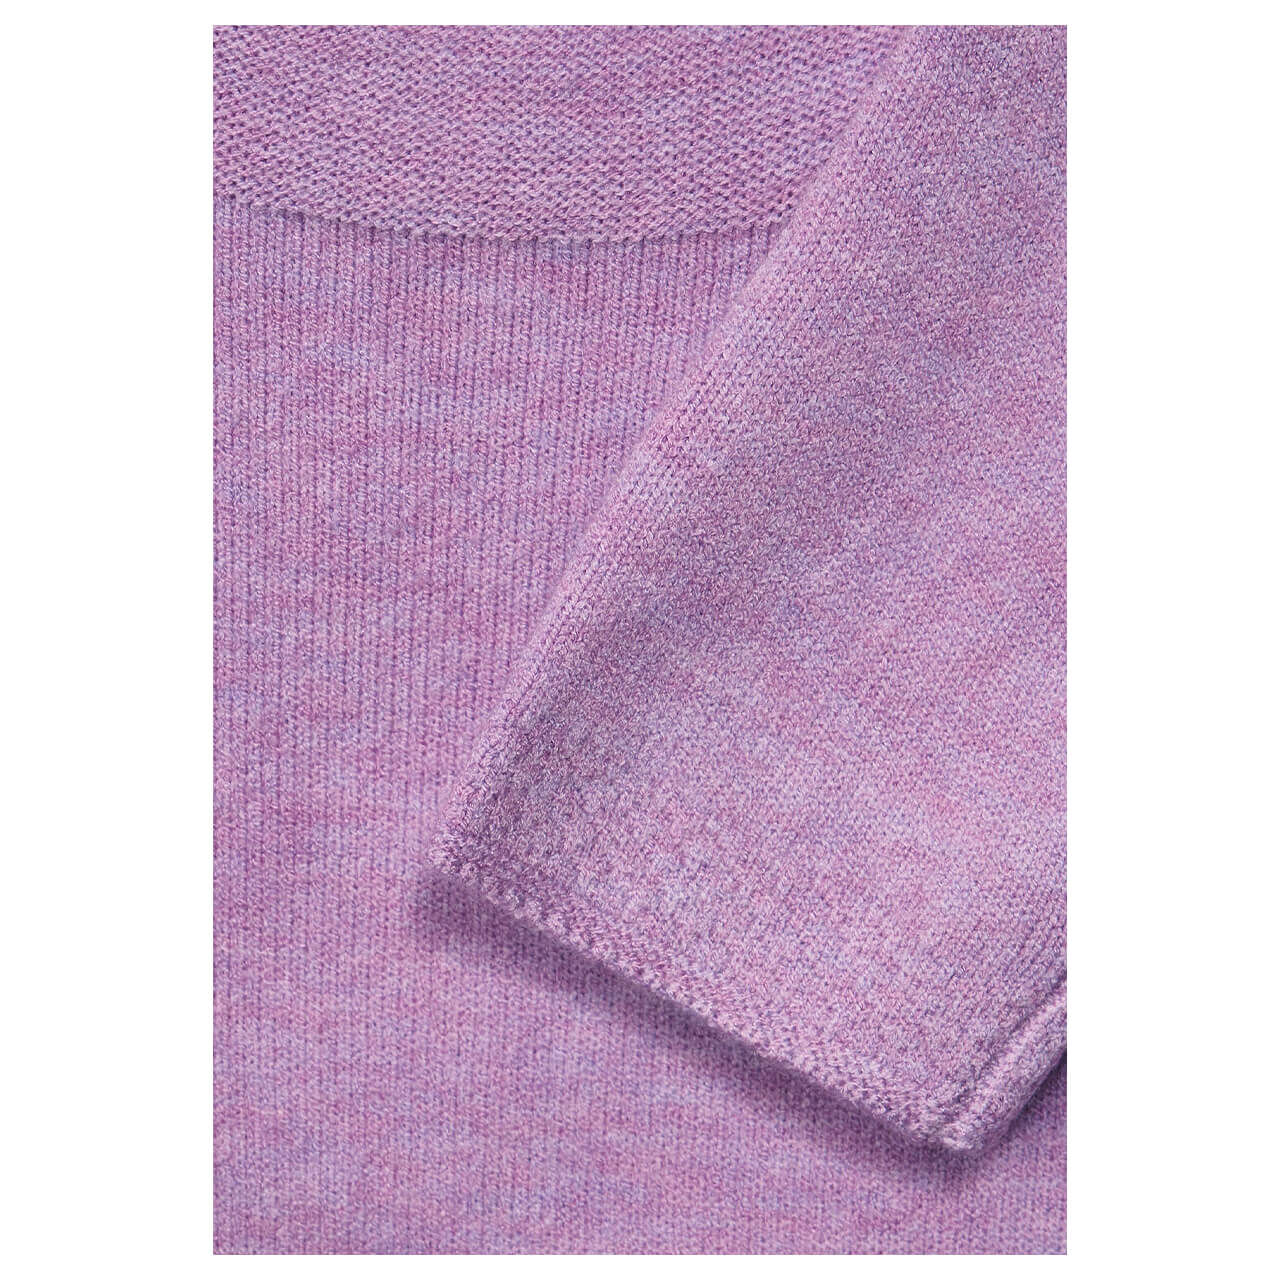 Street One Damen Pullover Rolled Edge Collar pure lilac melange